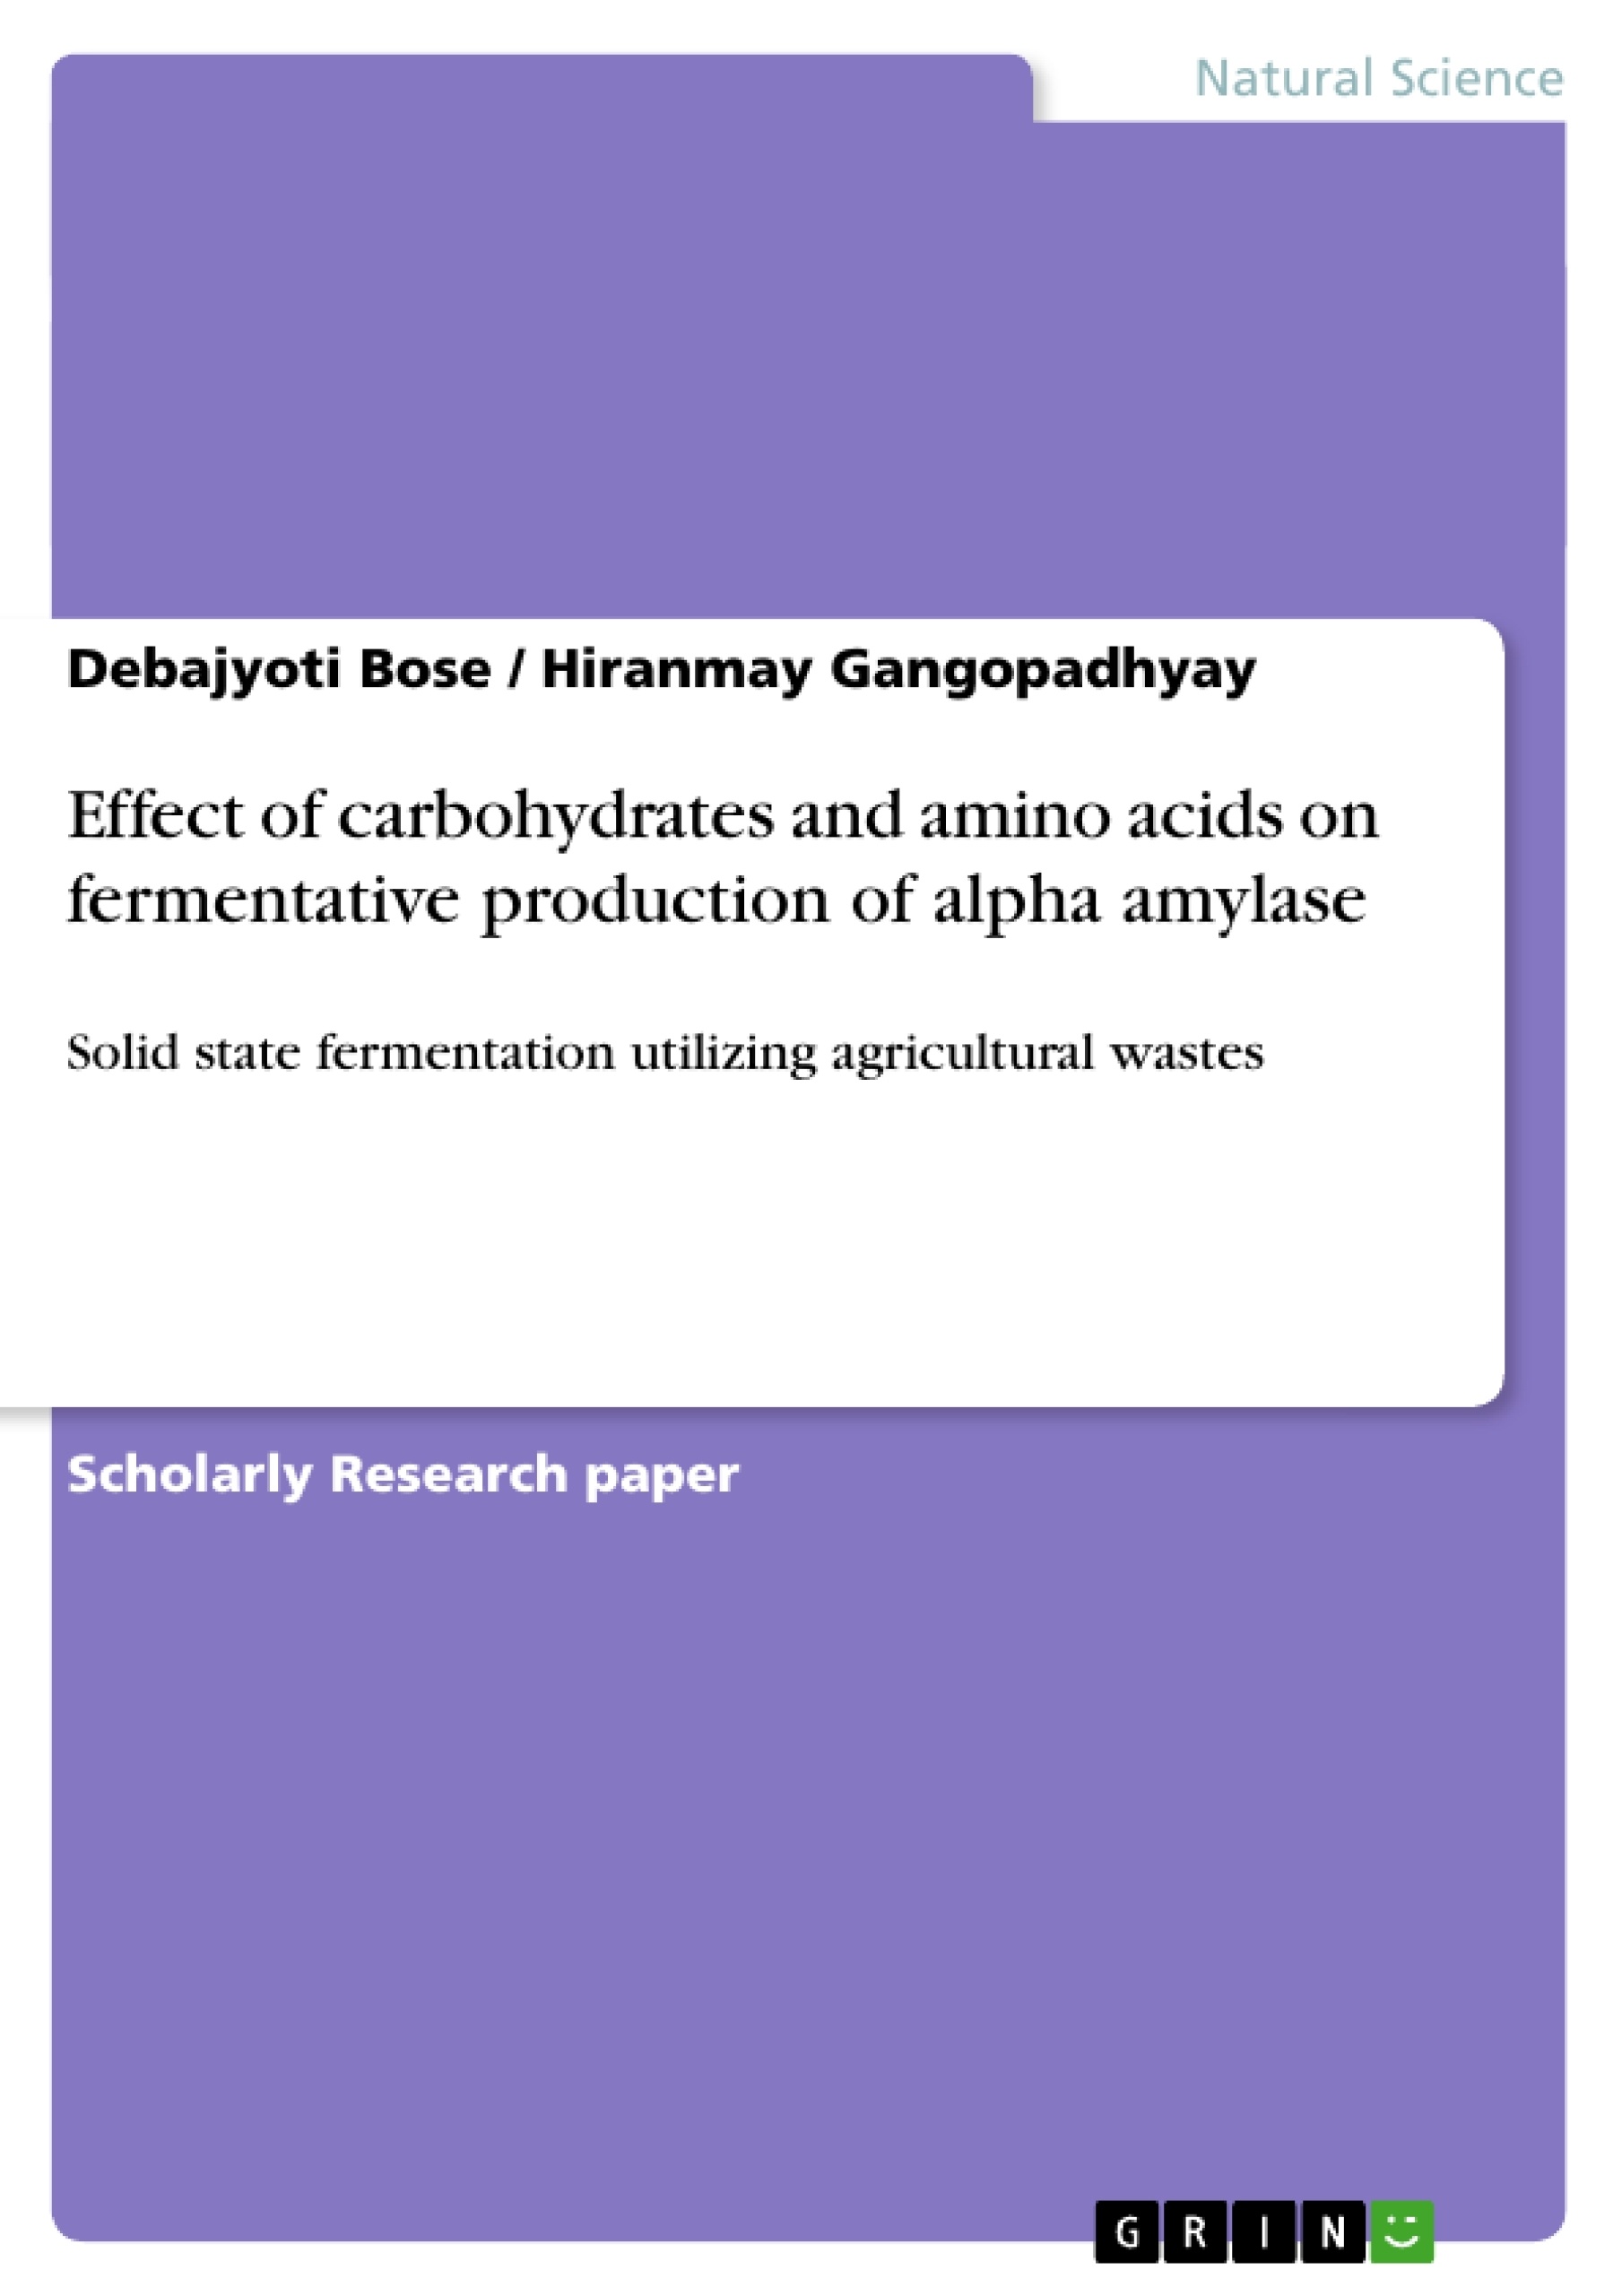 Titel: Effect of carbohydrates and amino acids on fermentative production of alpha amylase